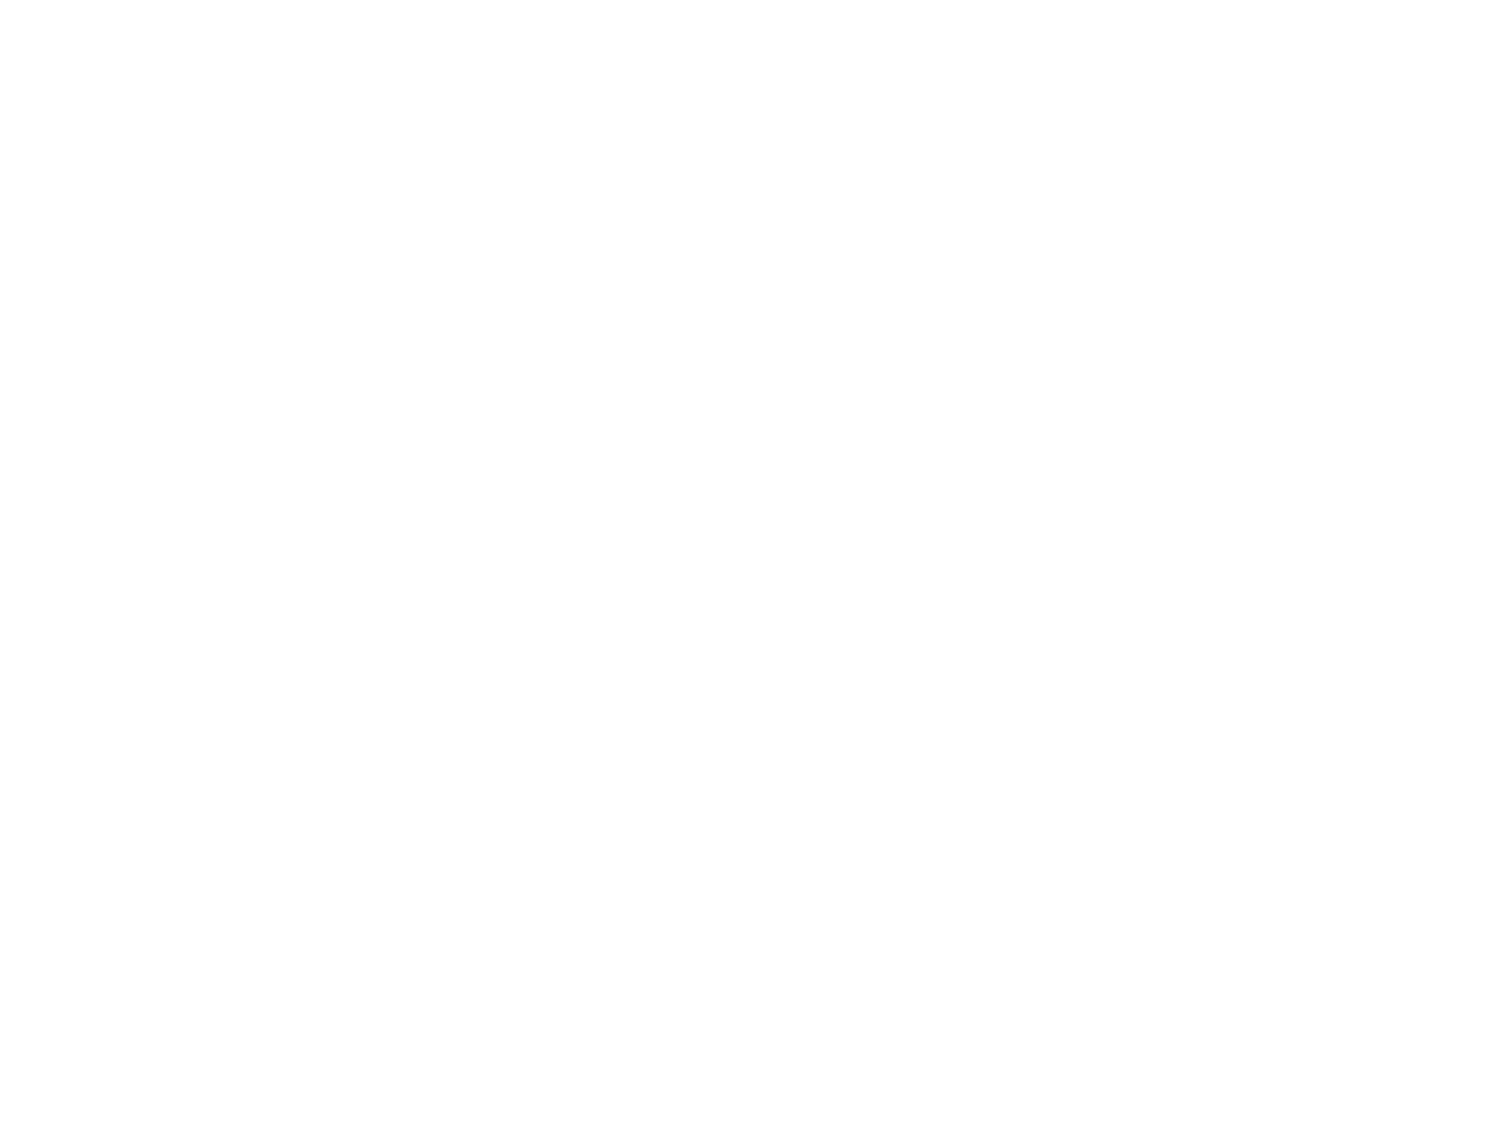 KF Consulting